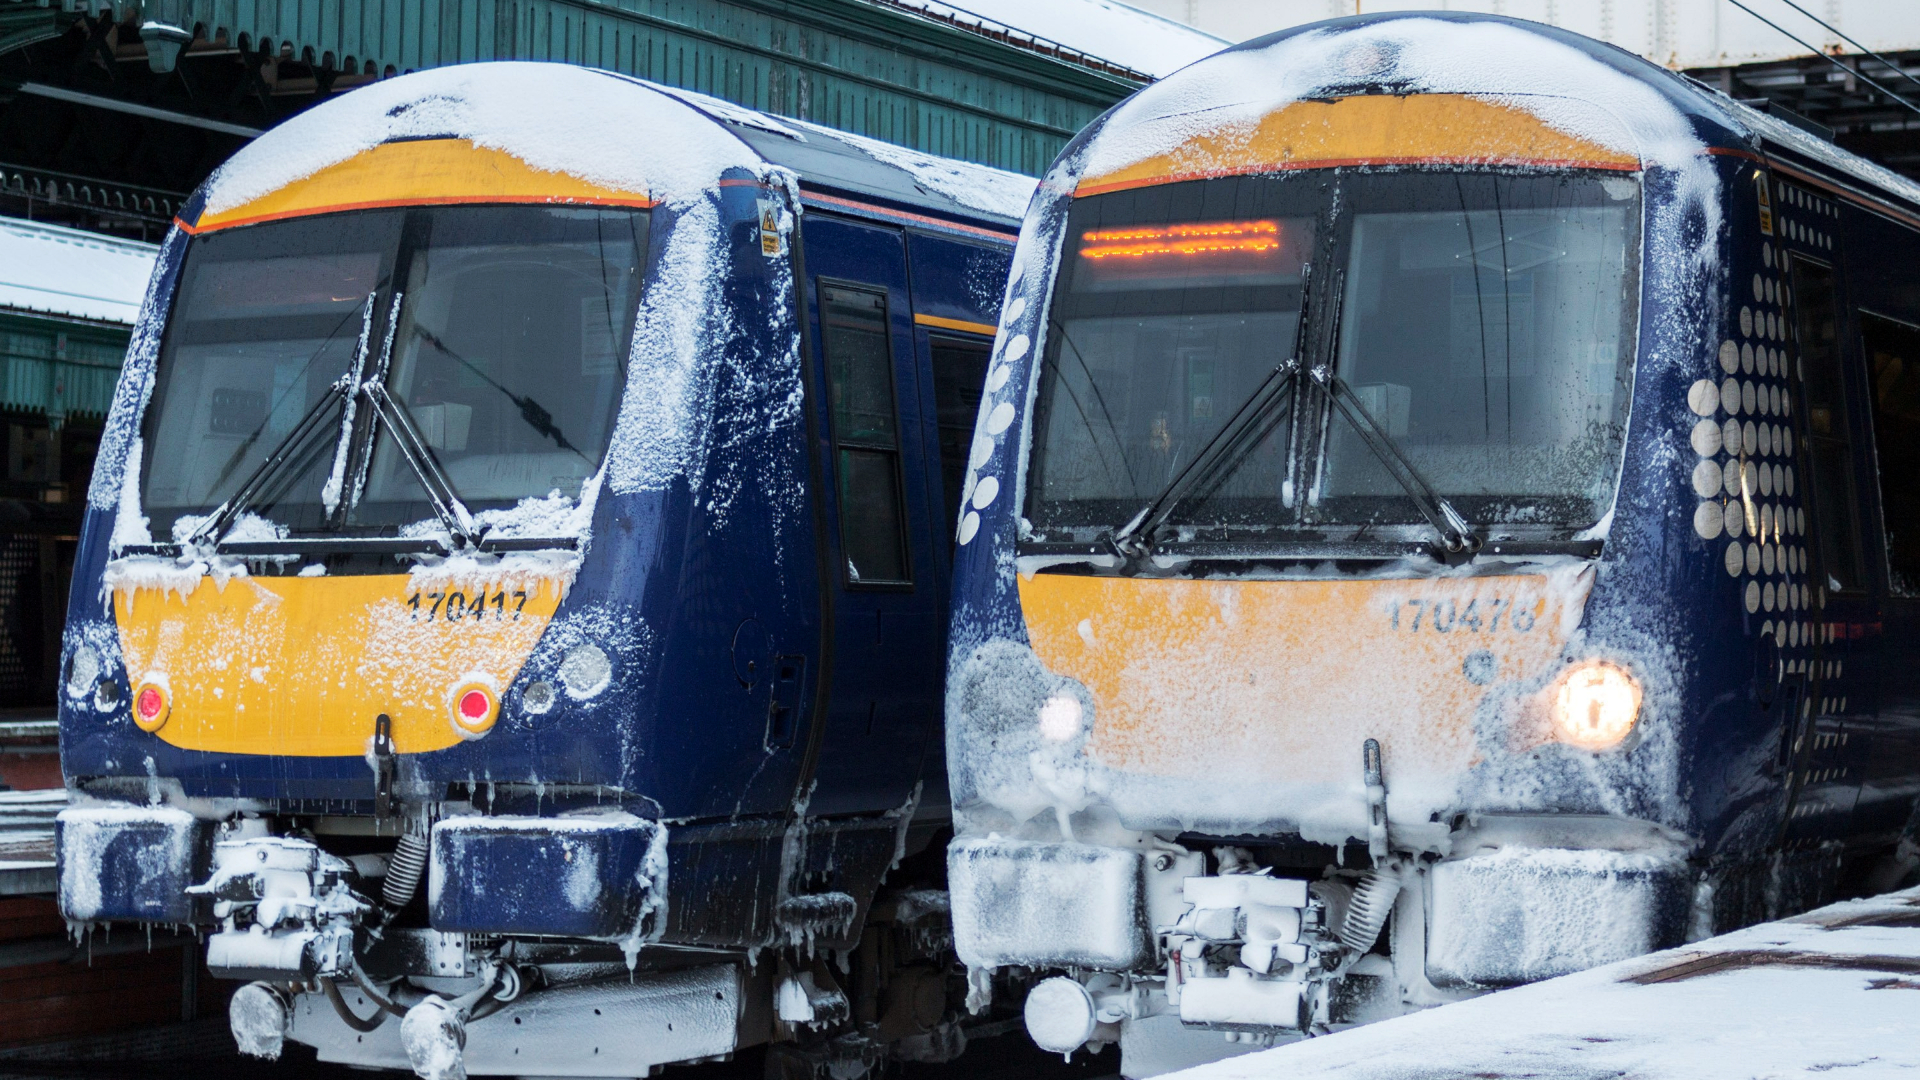 ScotRail said it had cancelled a number of its services on Thursday.